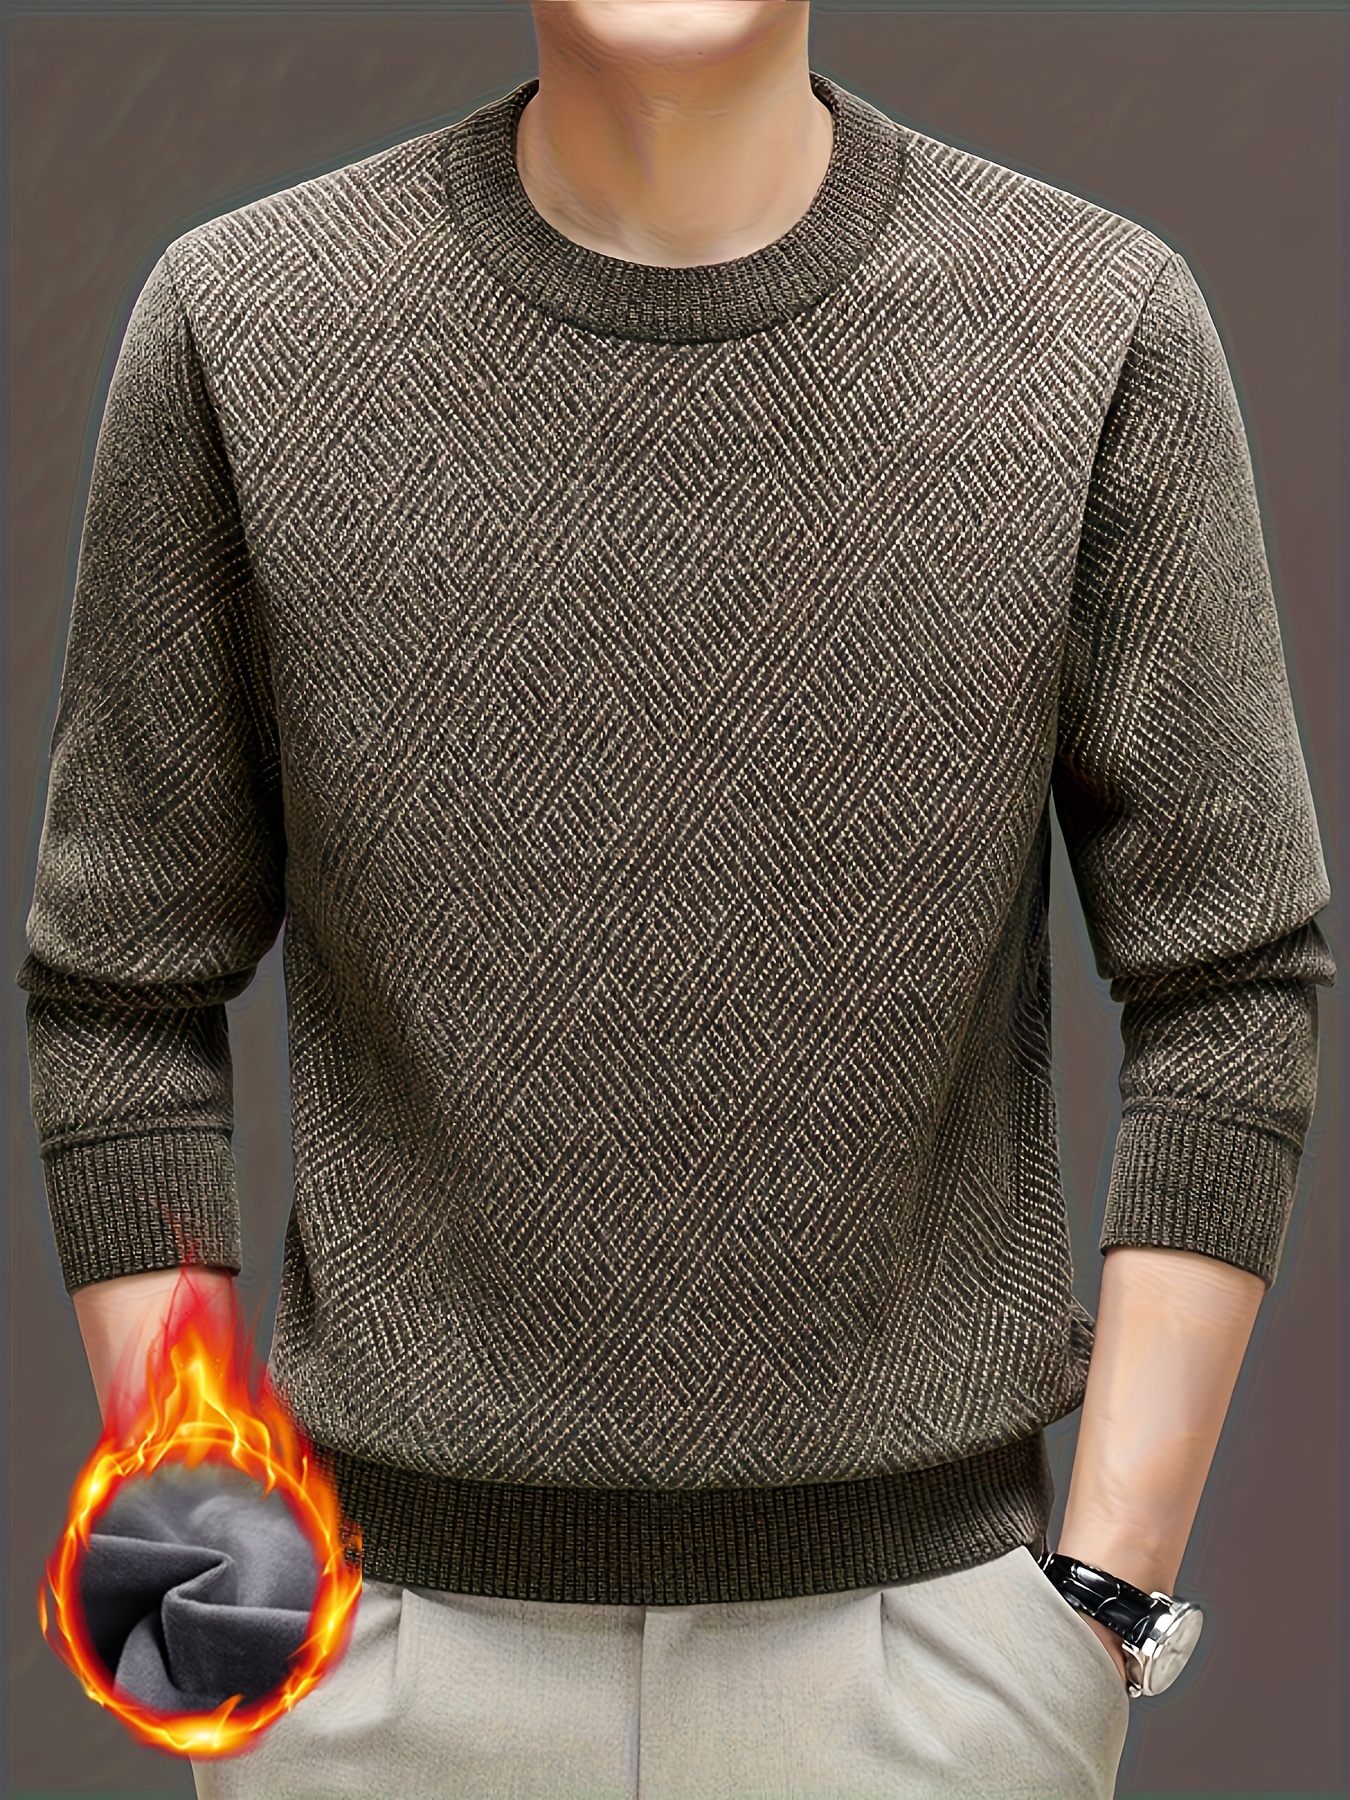 Men's Stylish Loose Solid Knitted Sweater, Casual Slightly Stretch